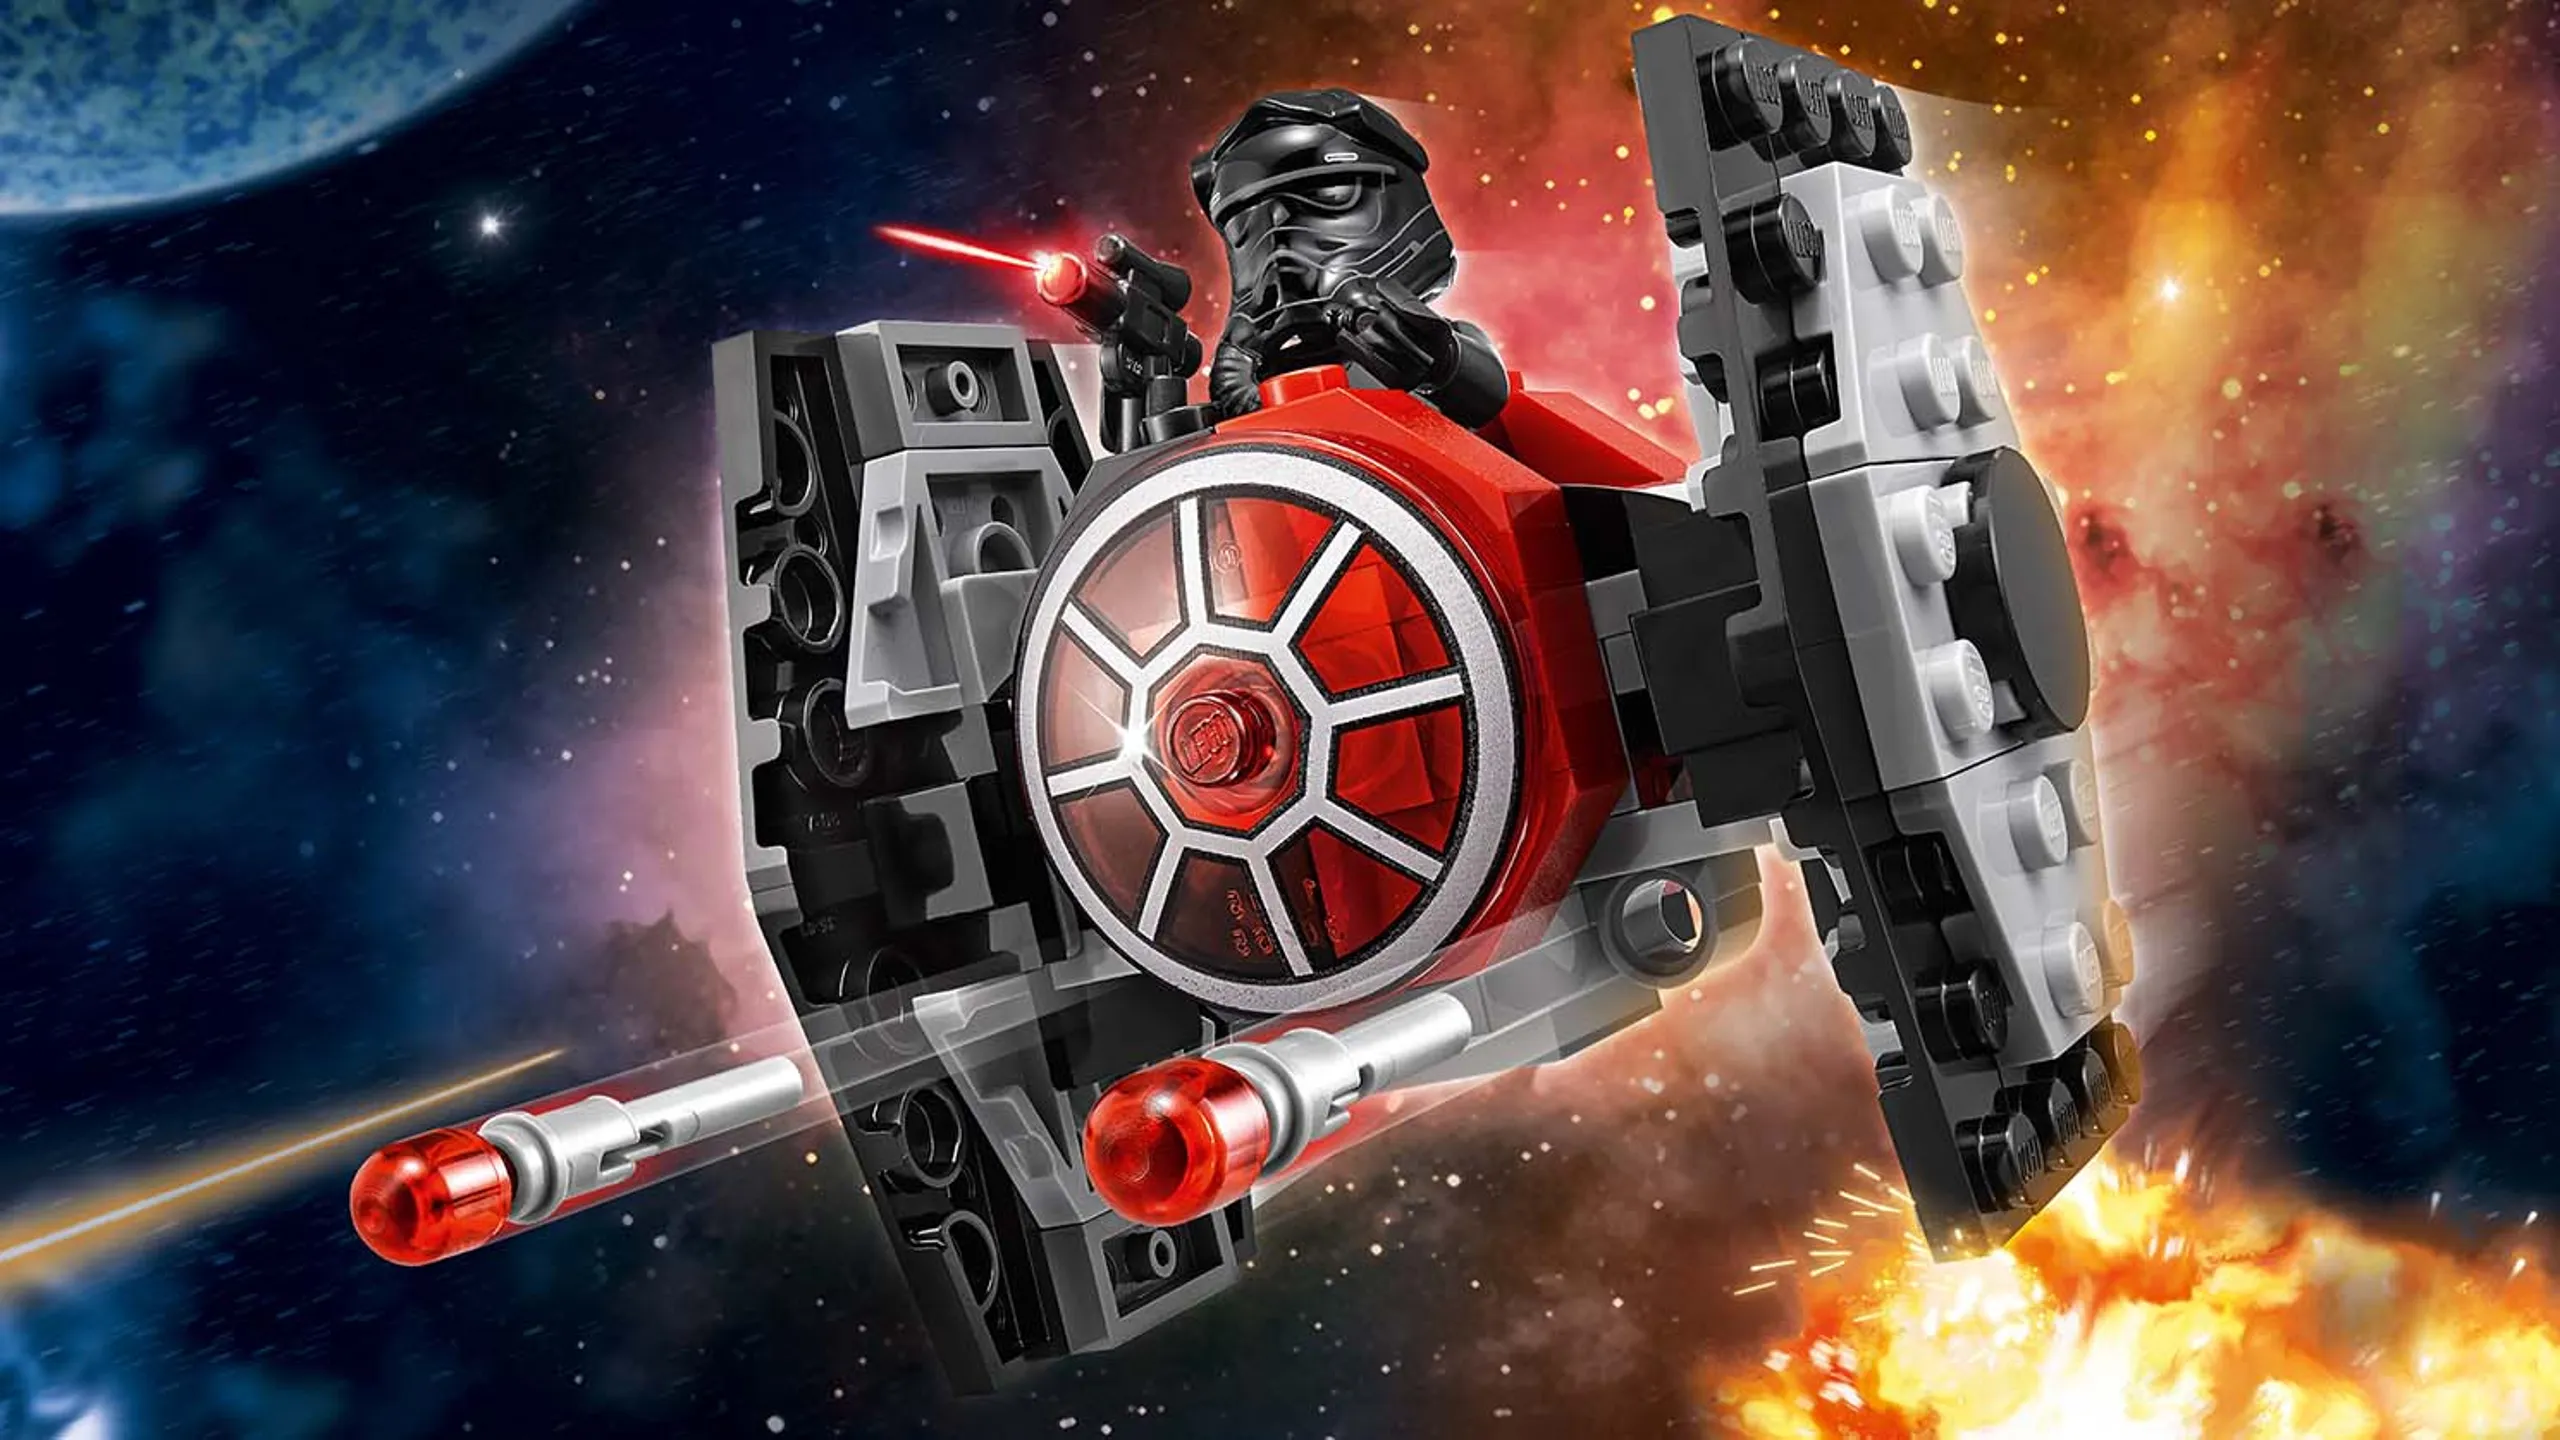 First Order TIE Fighter™ Microfighter - Videos - LEGO.com for kids